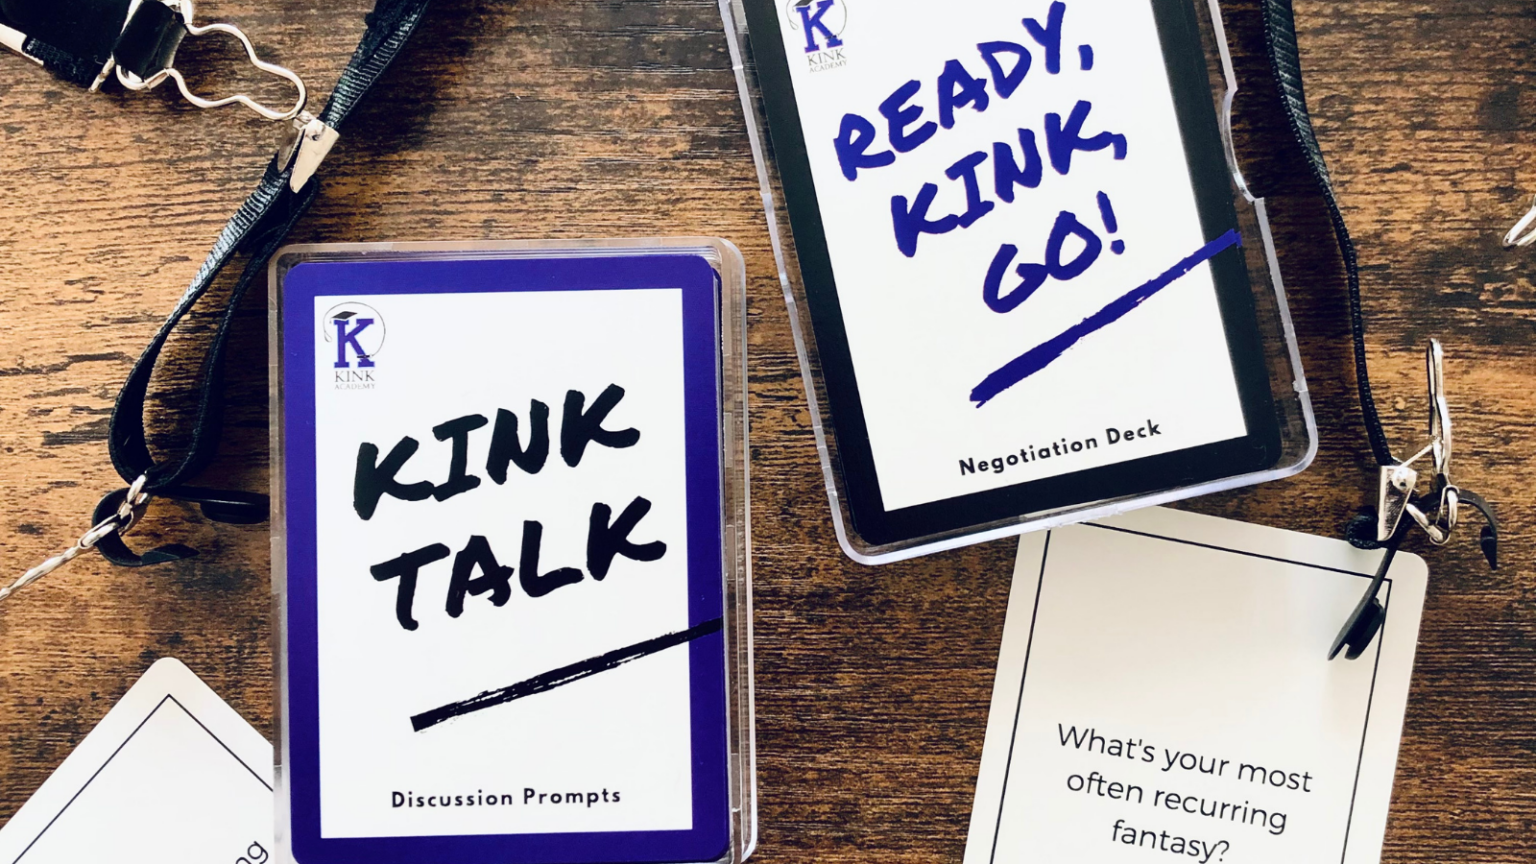 Kink Talk and Ready, Kink, Go! card games on a brown wood table